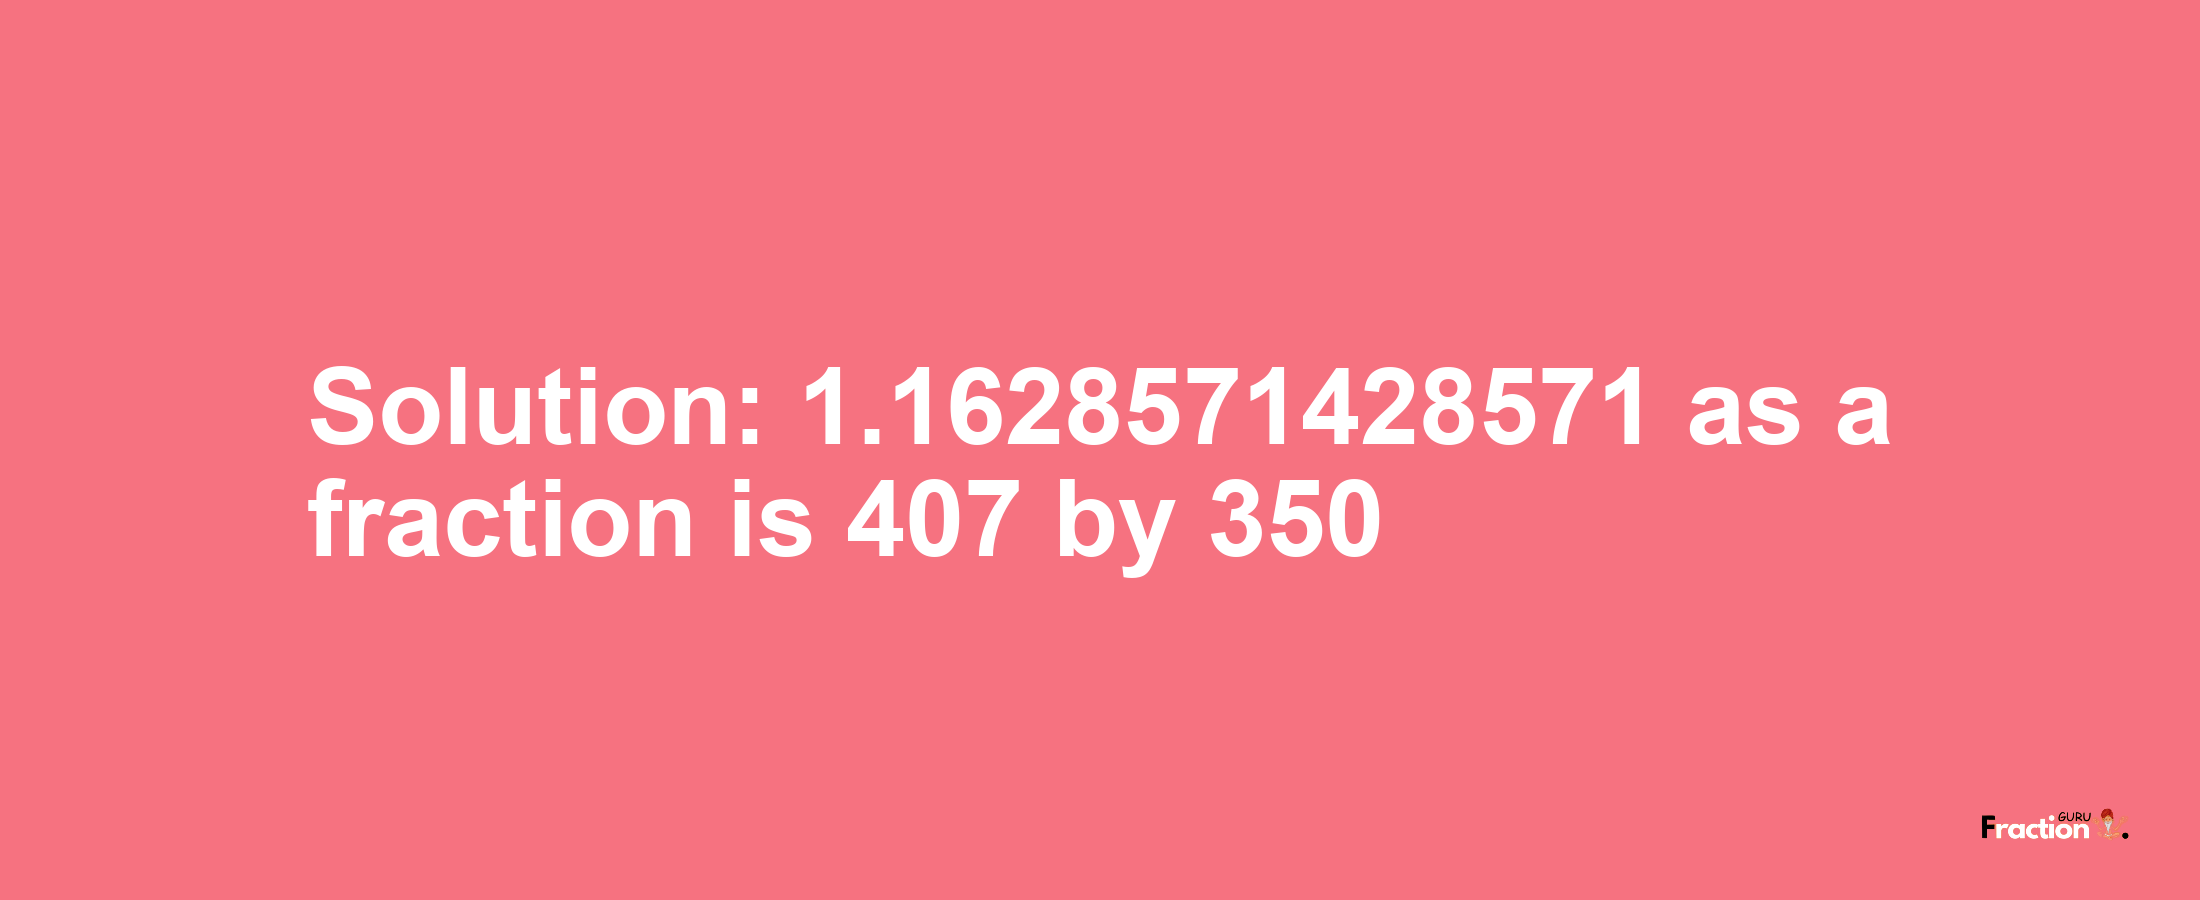 Solution:1.1628571428571 as a fraction is 407/350